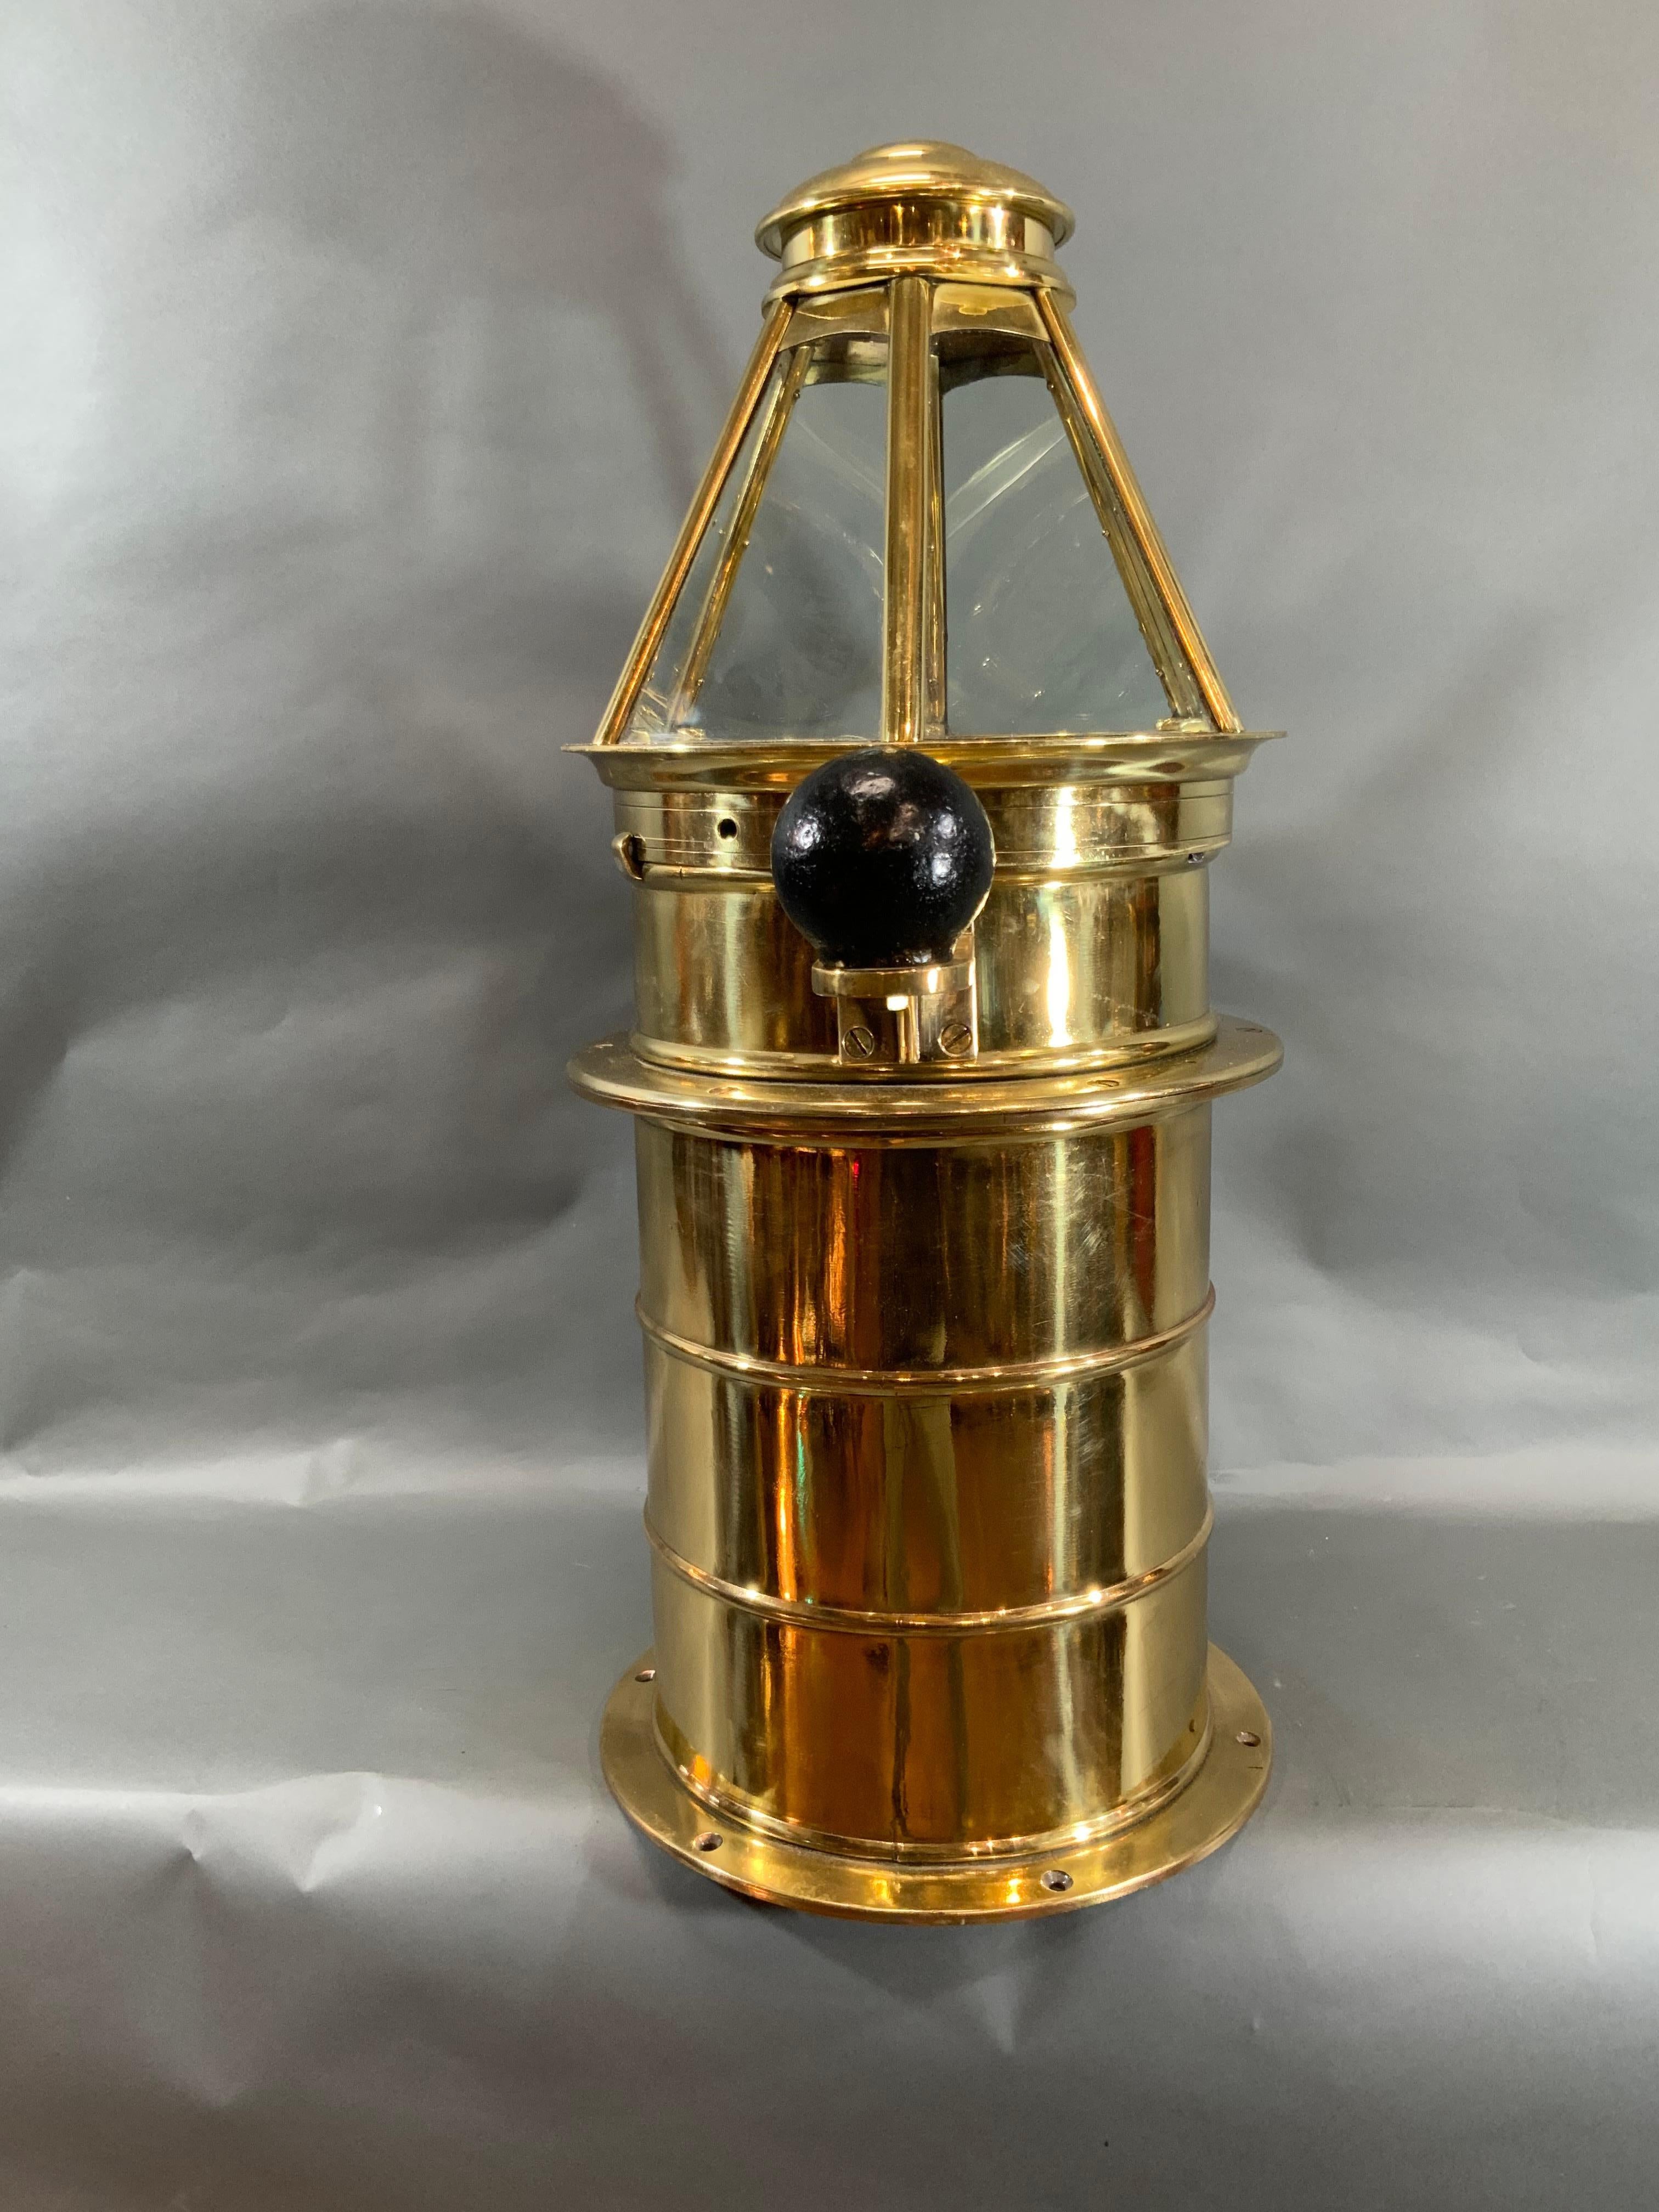 Outstanding Solid Brass Yacht Binnacle circa 1920 In Good Condition For Sale In Norwell, MA